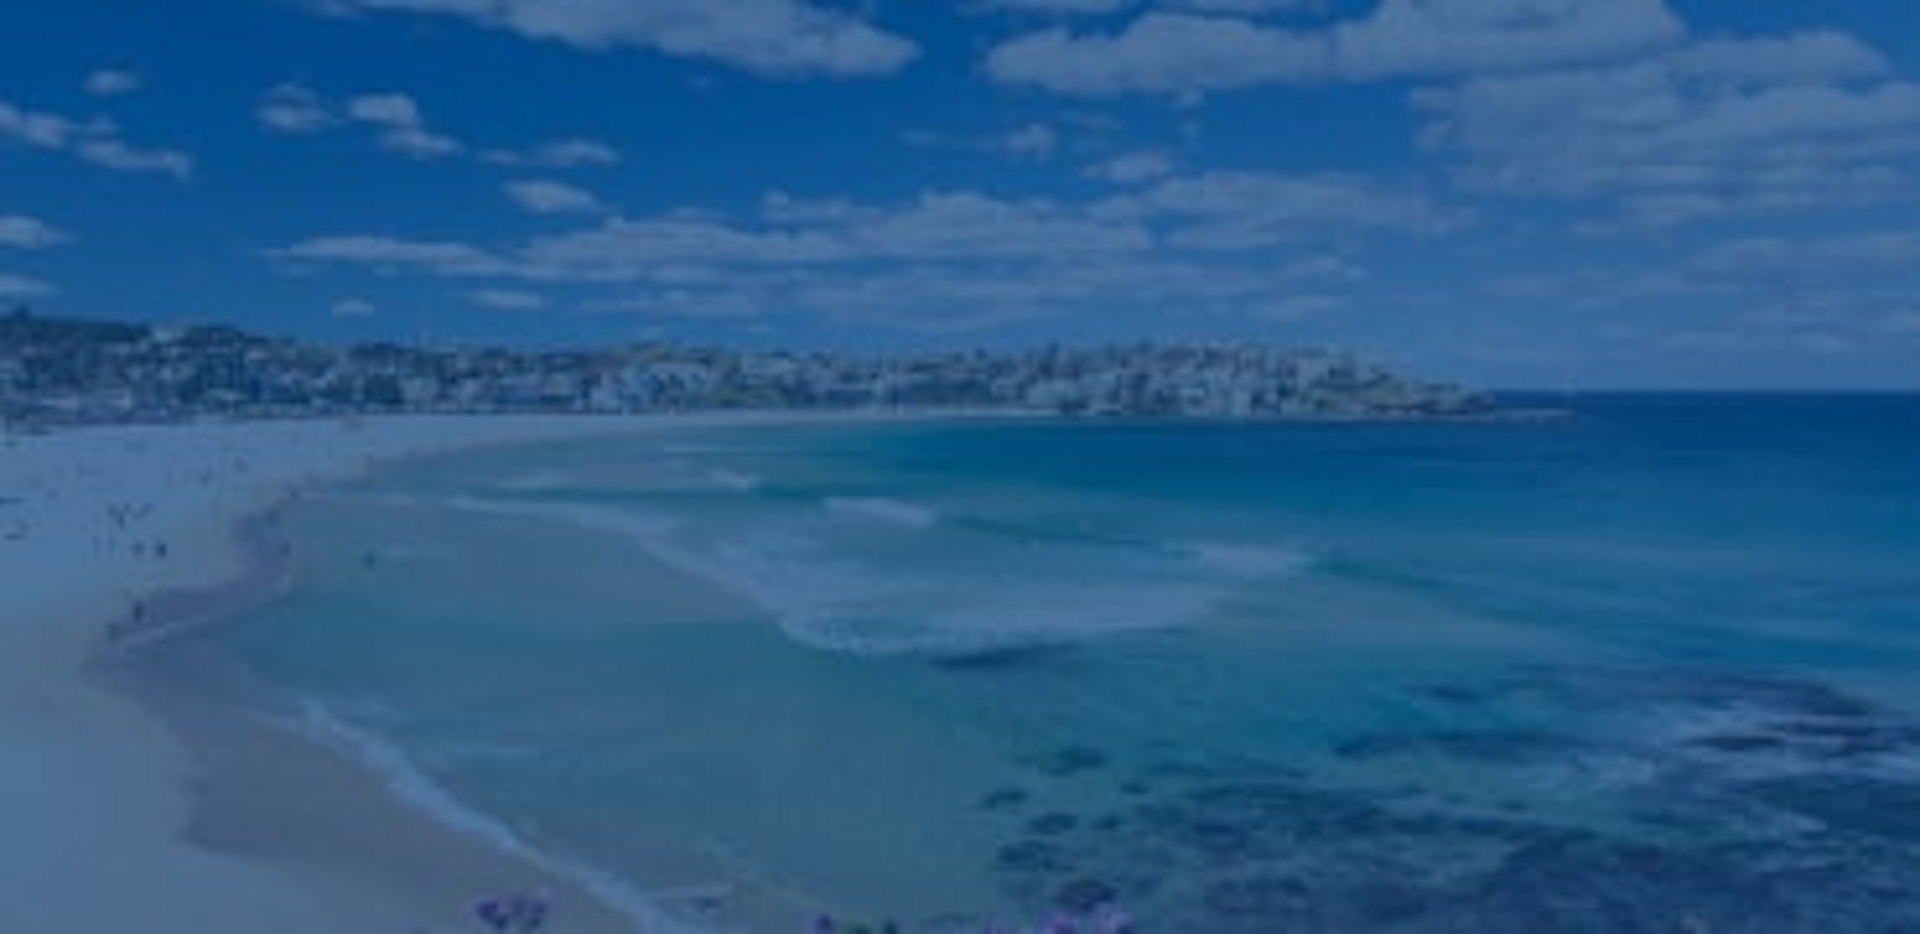 Northern Beaches Council background image